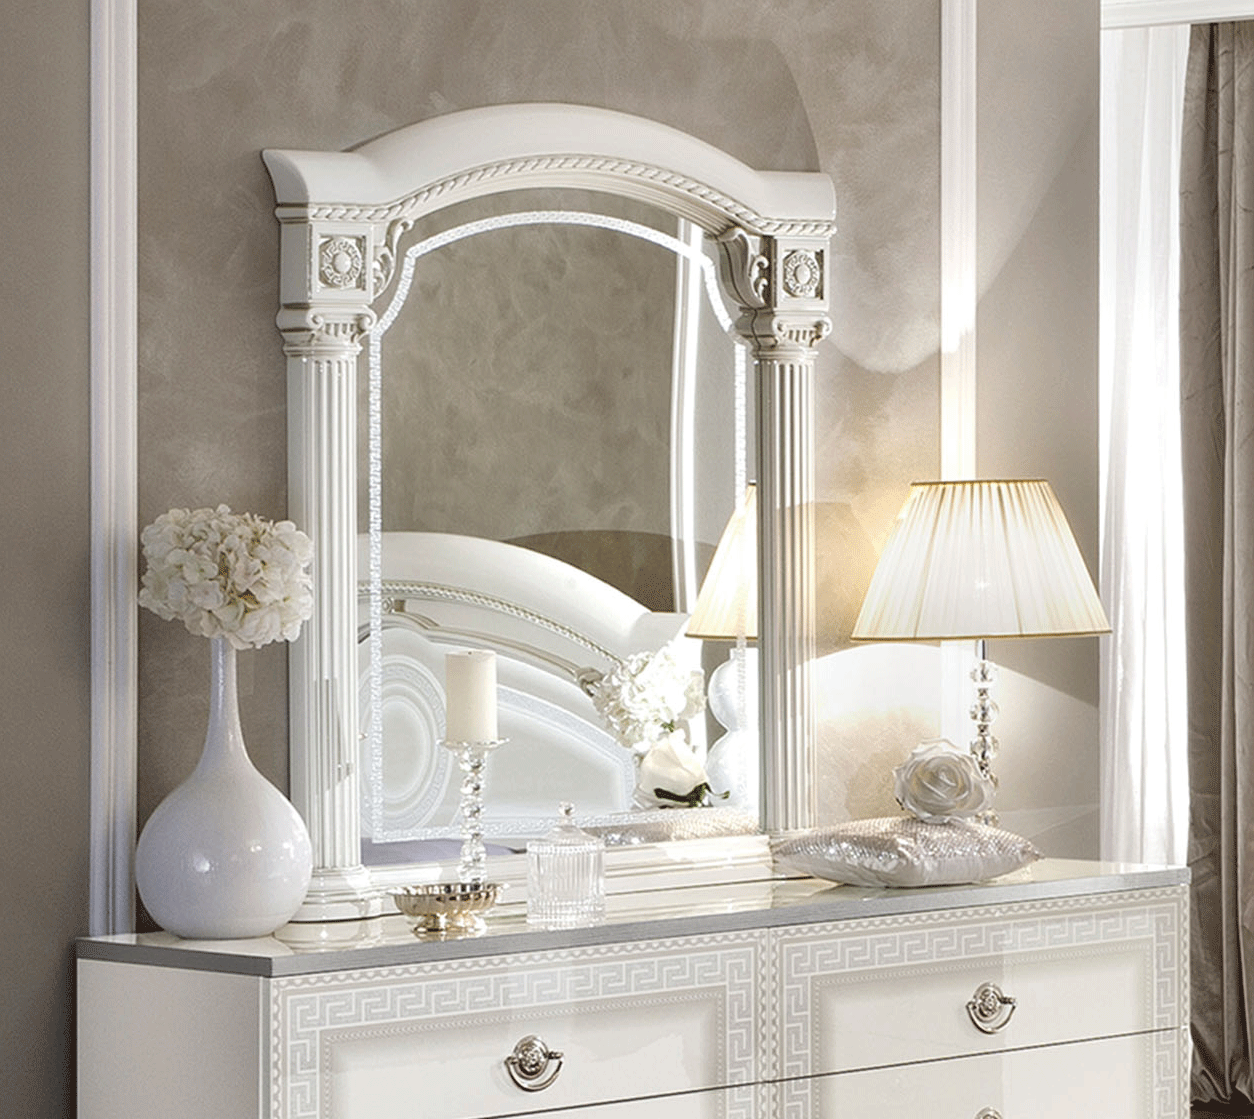 Bedroom Furniture Classic Bedrooms QS and KS Aida White/Silver mirror